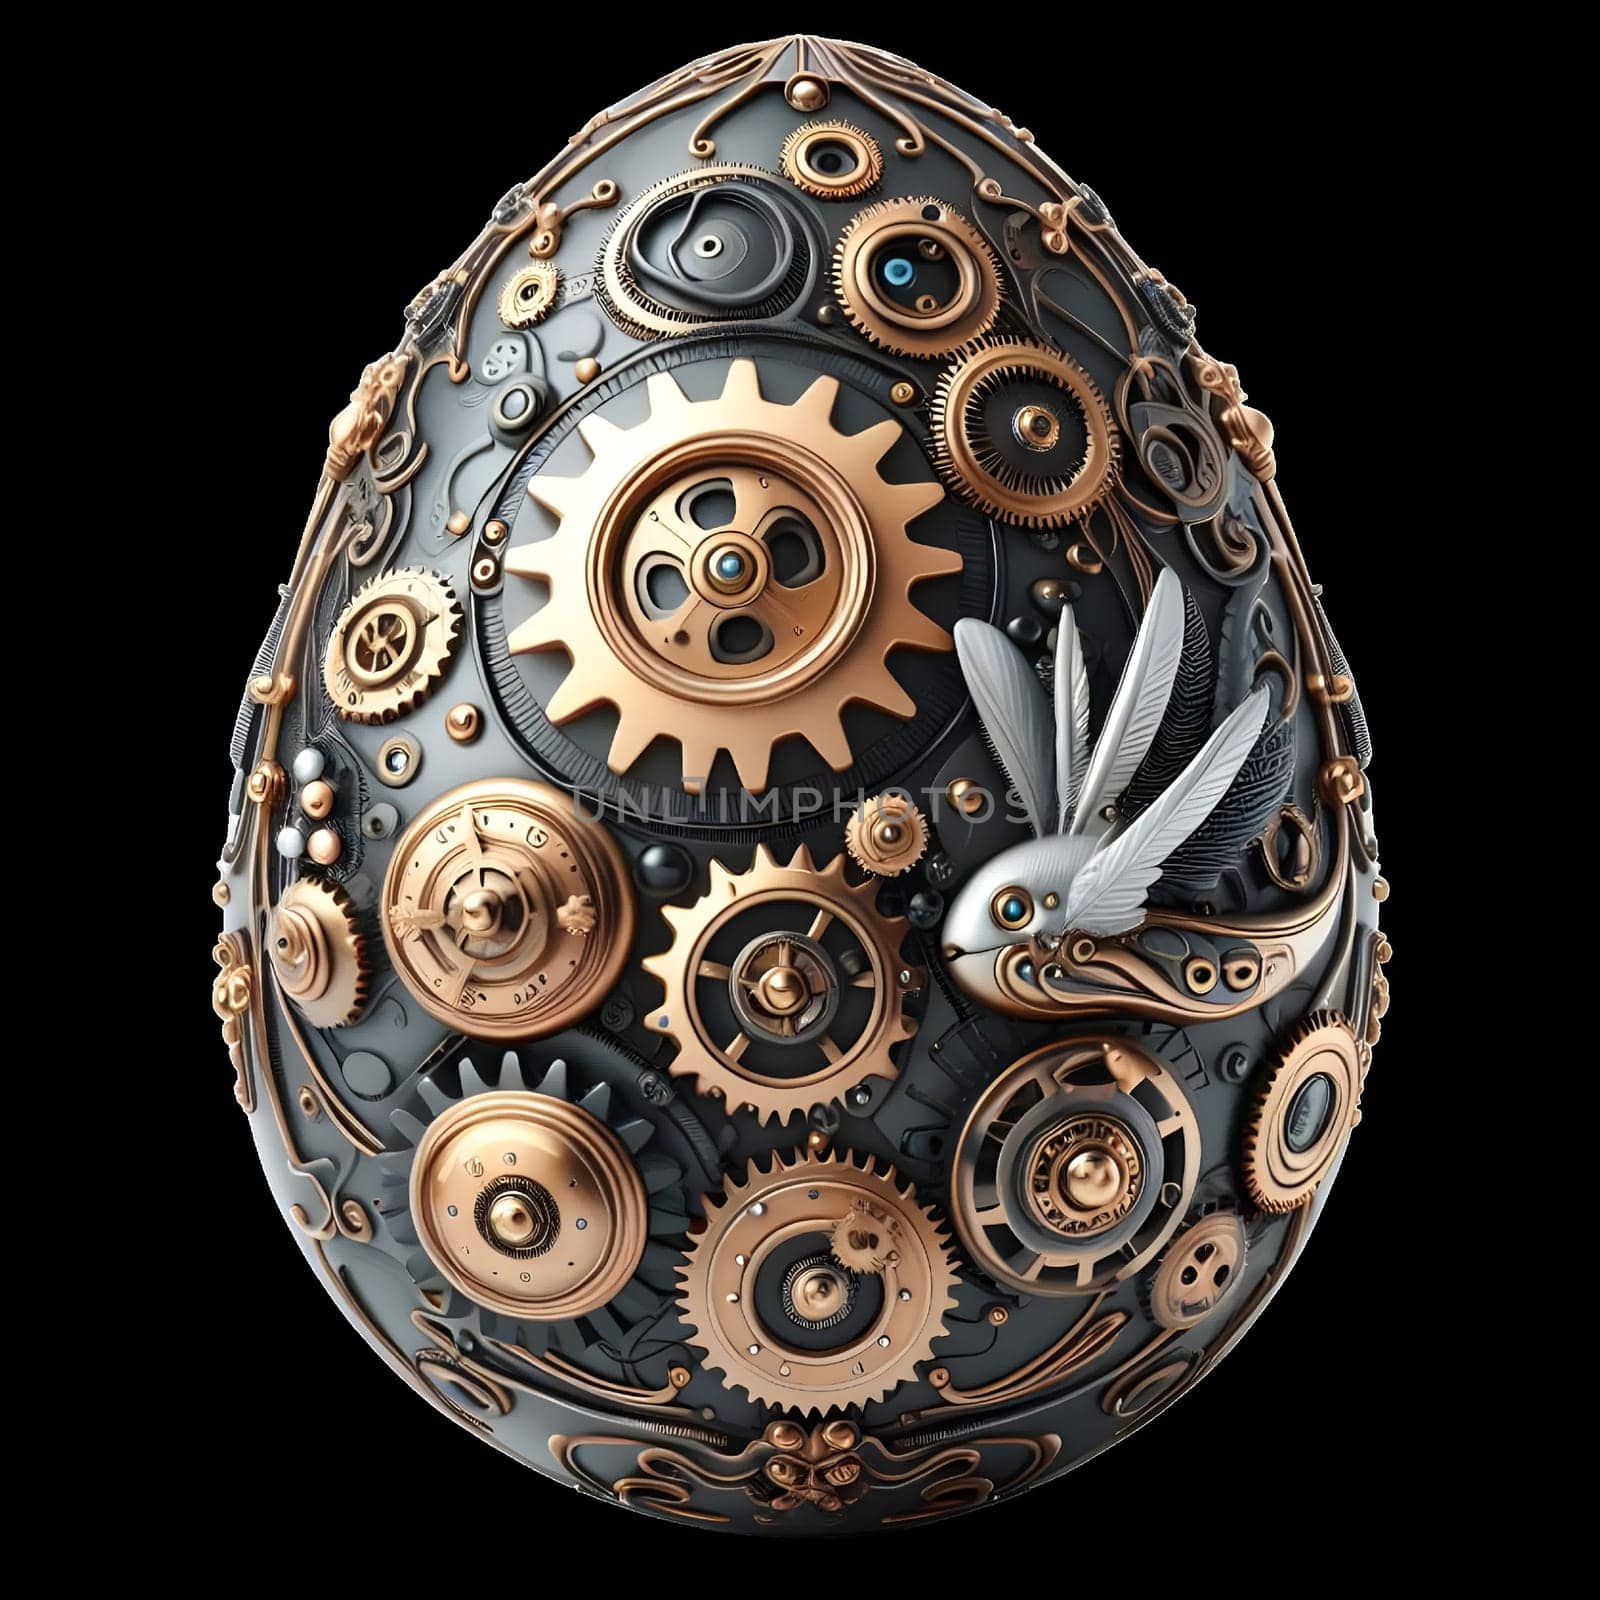 A luxurious easter egg, encrusted with sparkling jewels and intricate filigree, fit for royalty-free Jeweled Egg, Easter Egg, Paschal Egg, Jewelry Art, Home Decor, Art Collectible, OOAK Gifts by Designlab